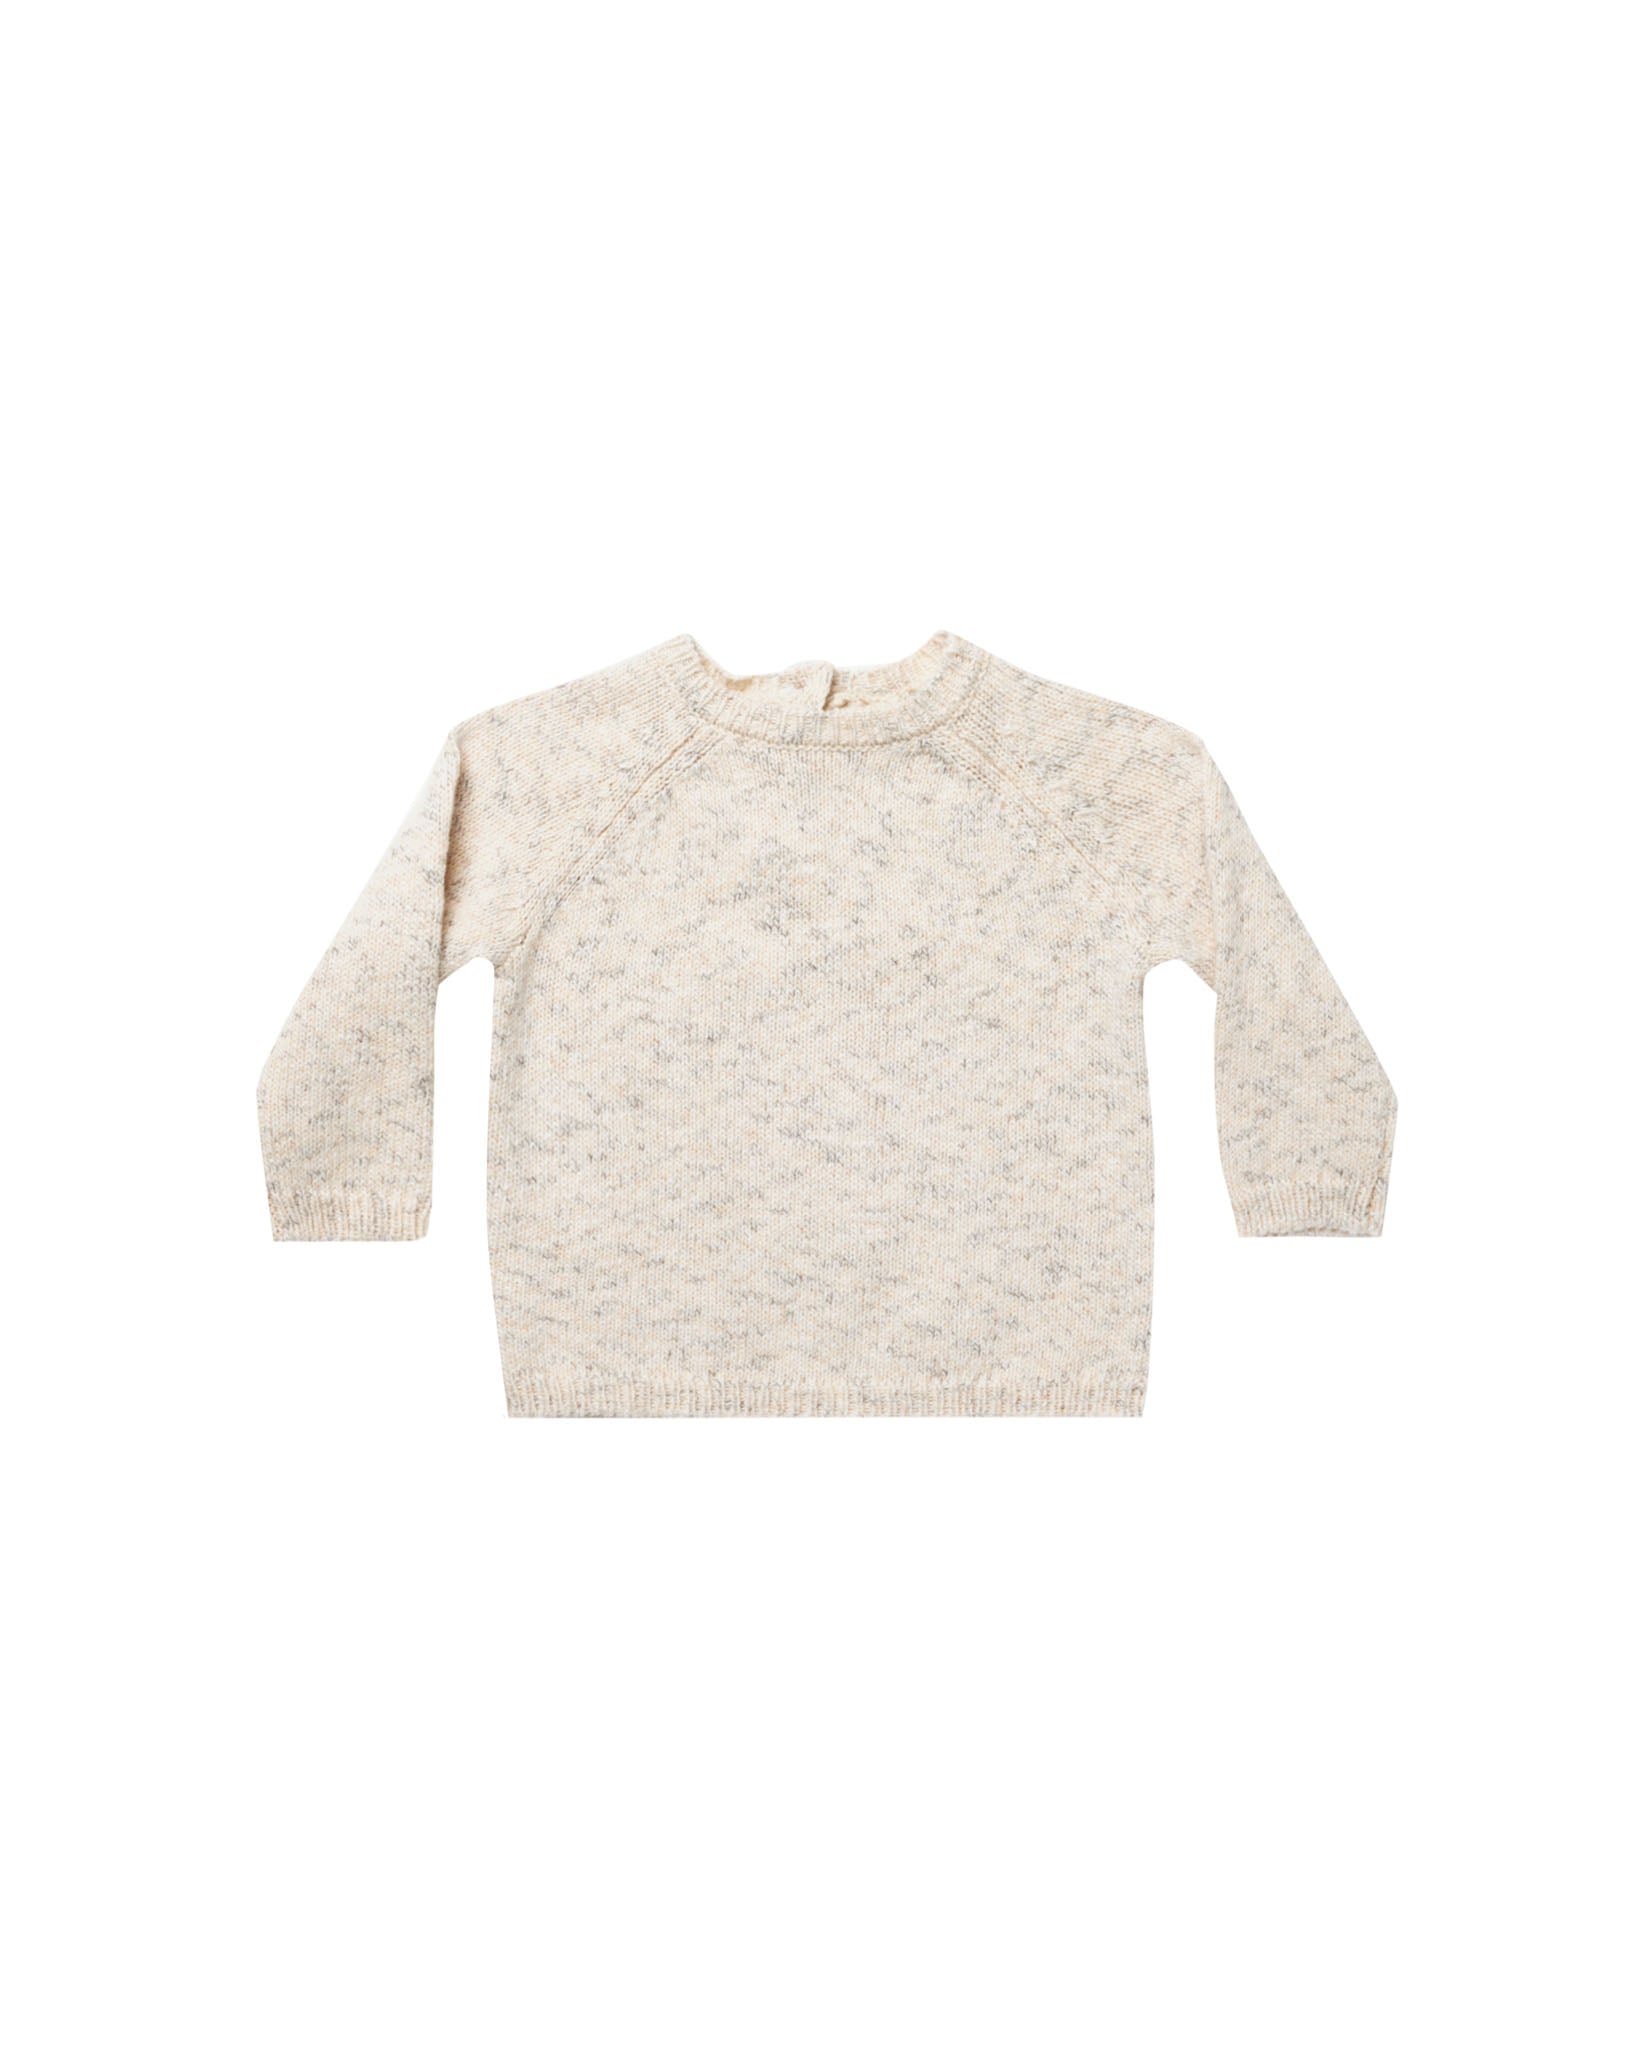 Natural Speckled Knit Sweater & Pant - Twinkle Twinkle Little One